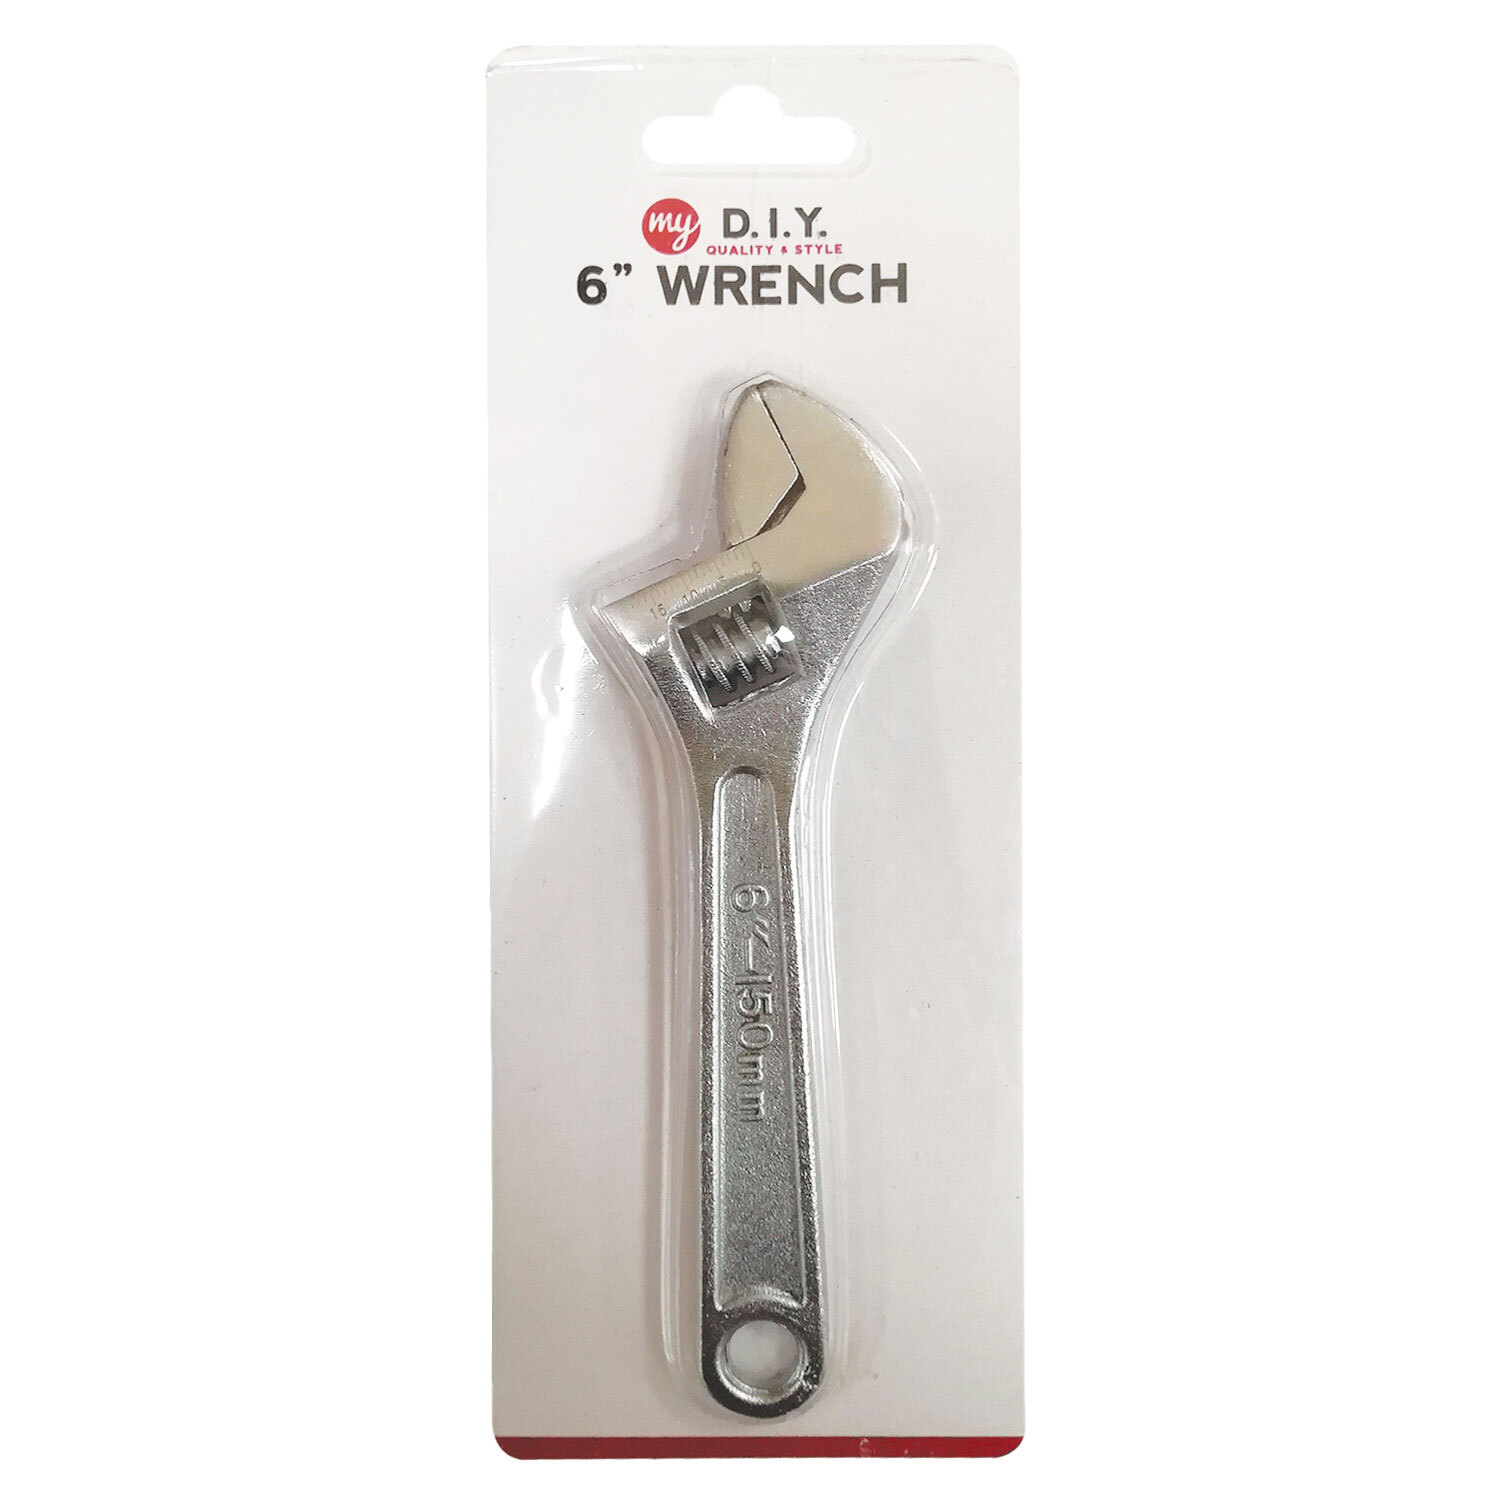 My DIY Adjustable Wrench 6 inch Image